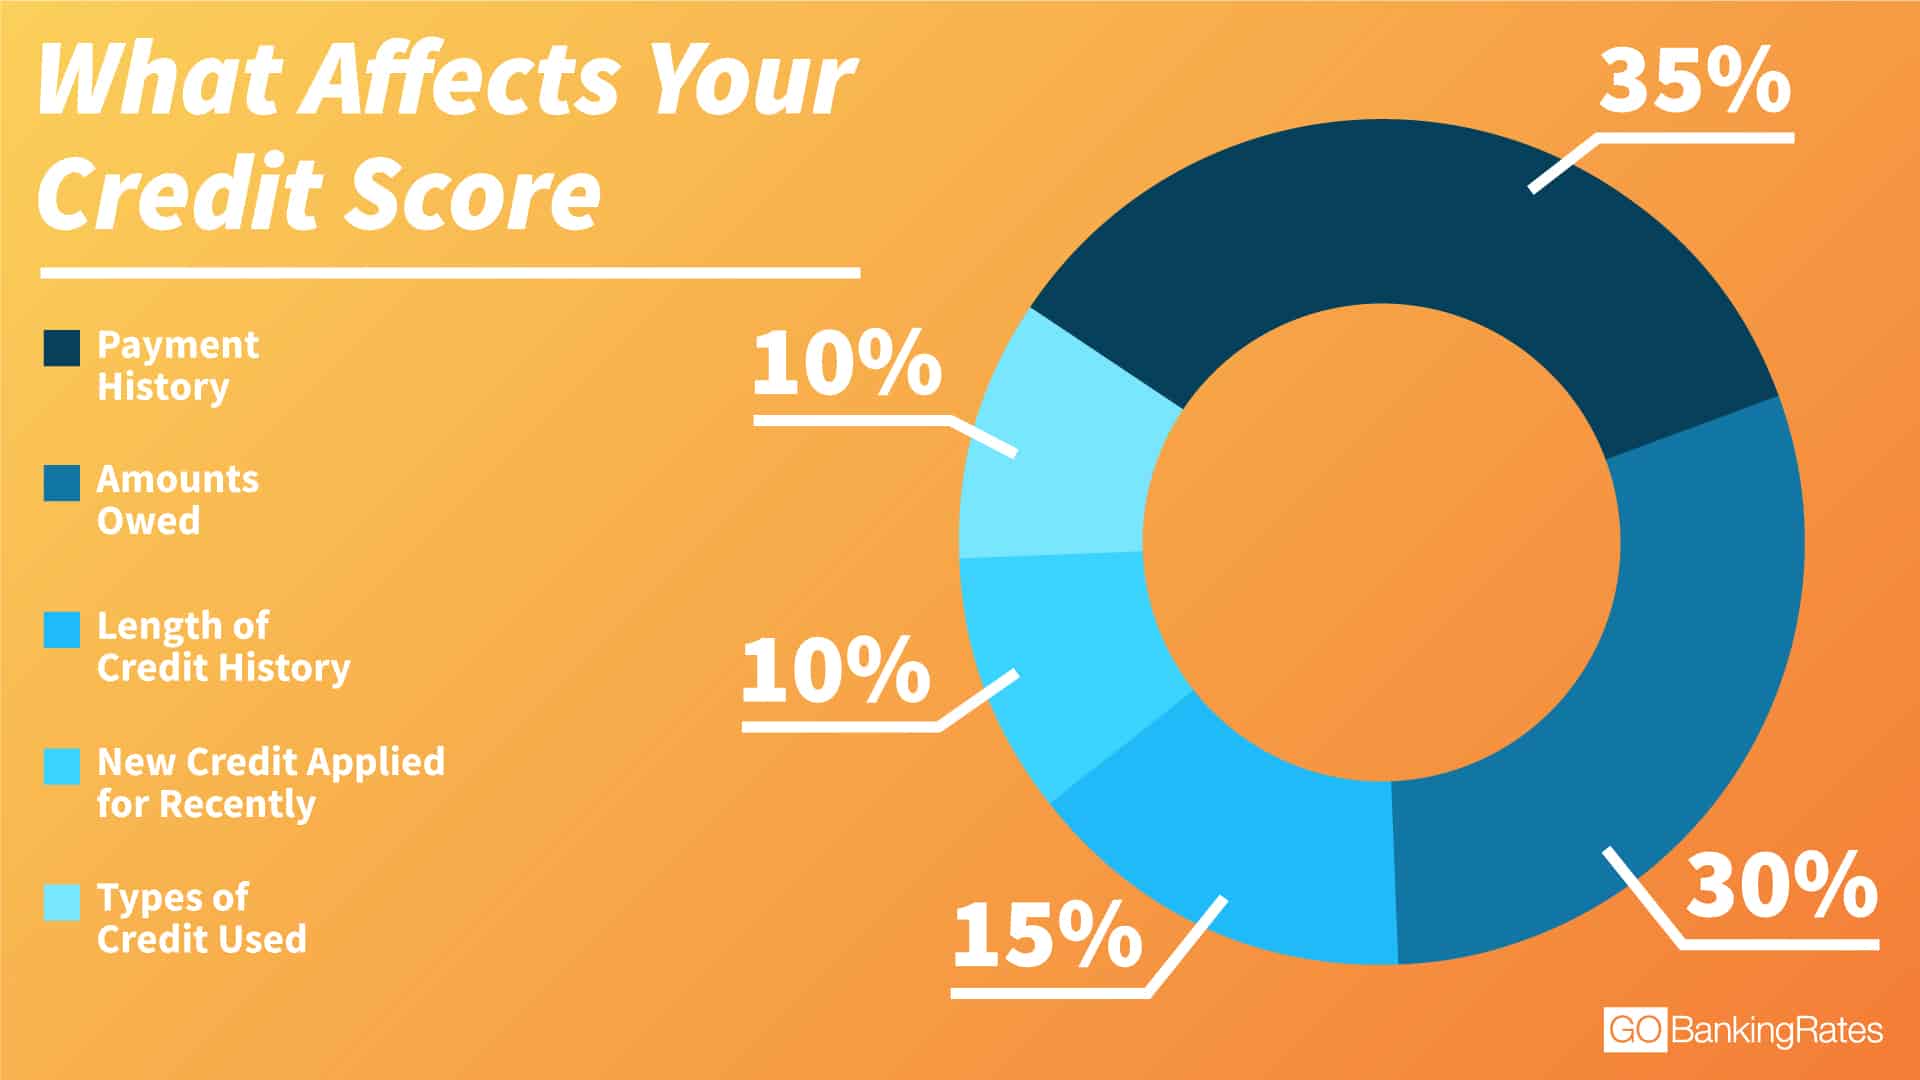 How Identity Theft Affects Your Credit Score?